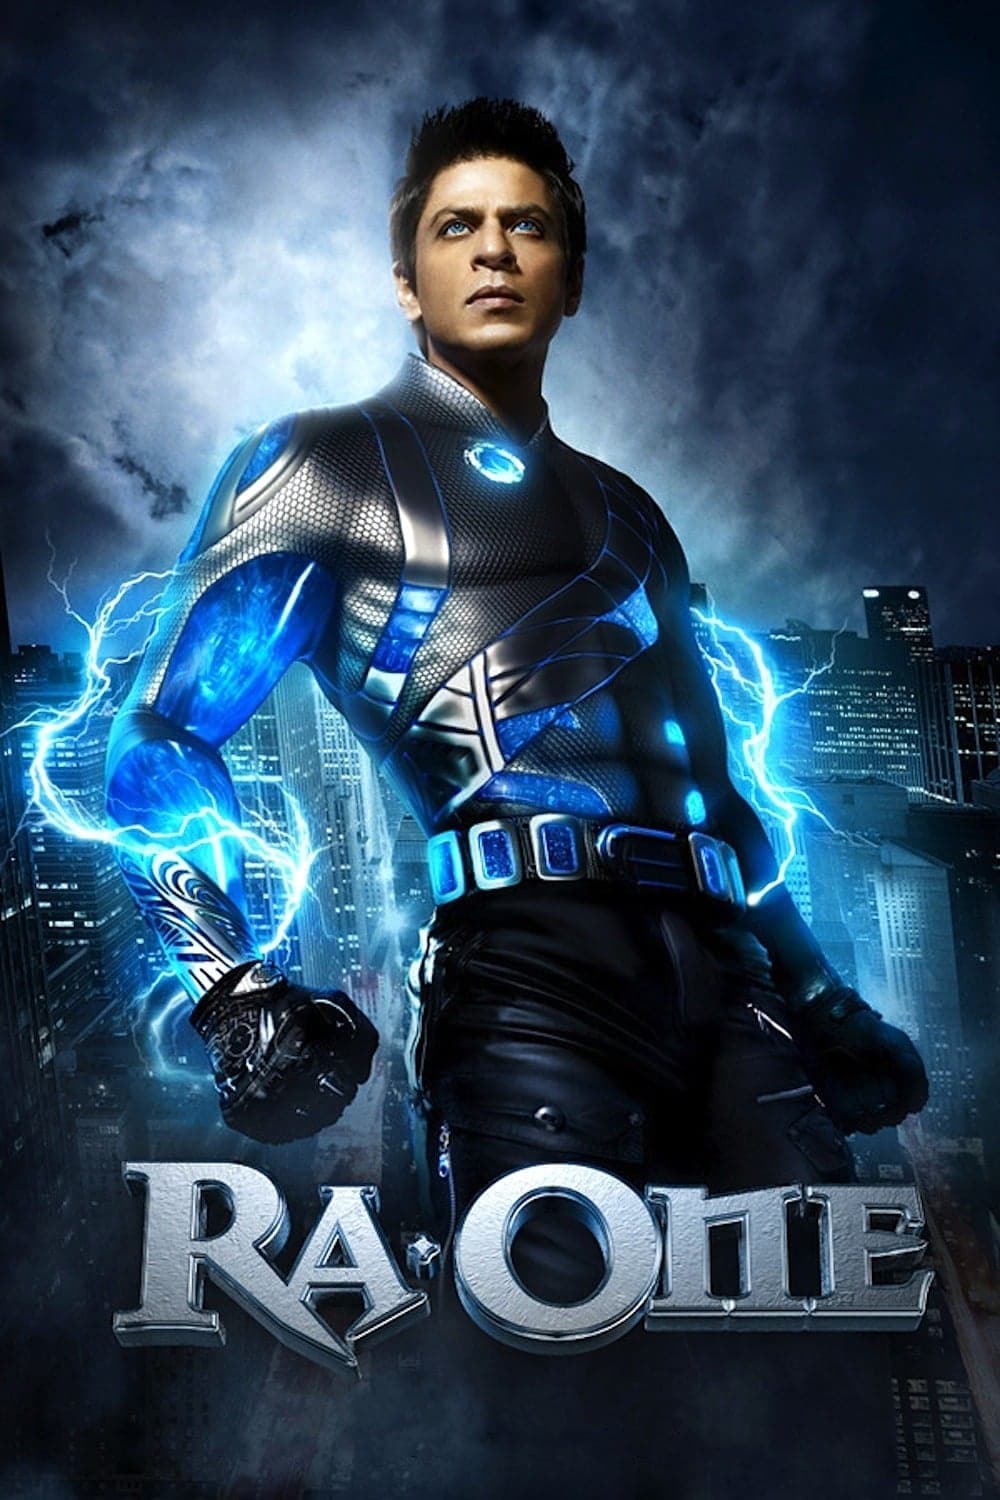 Poster for the movie "Ra.One"